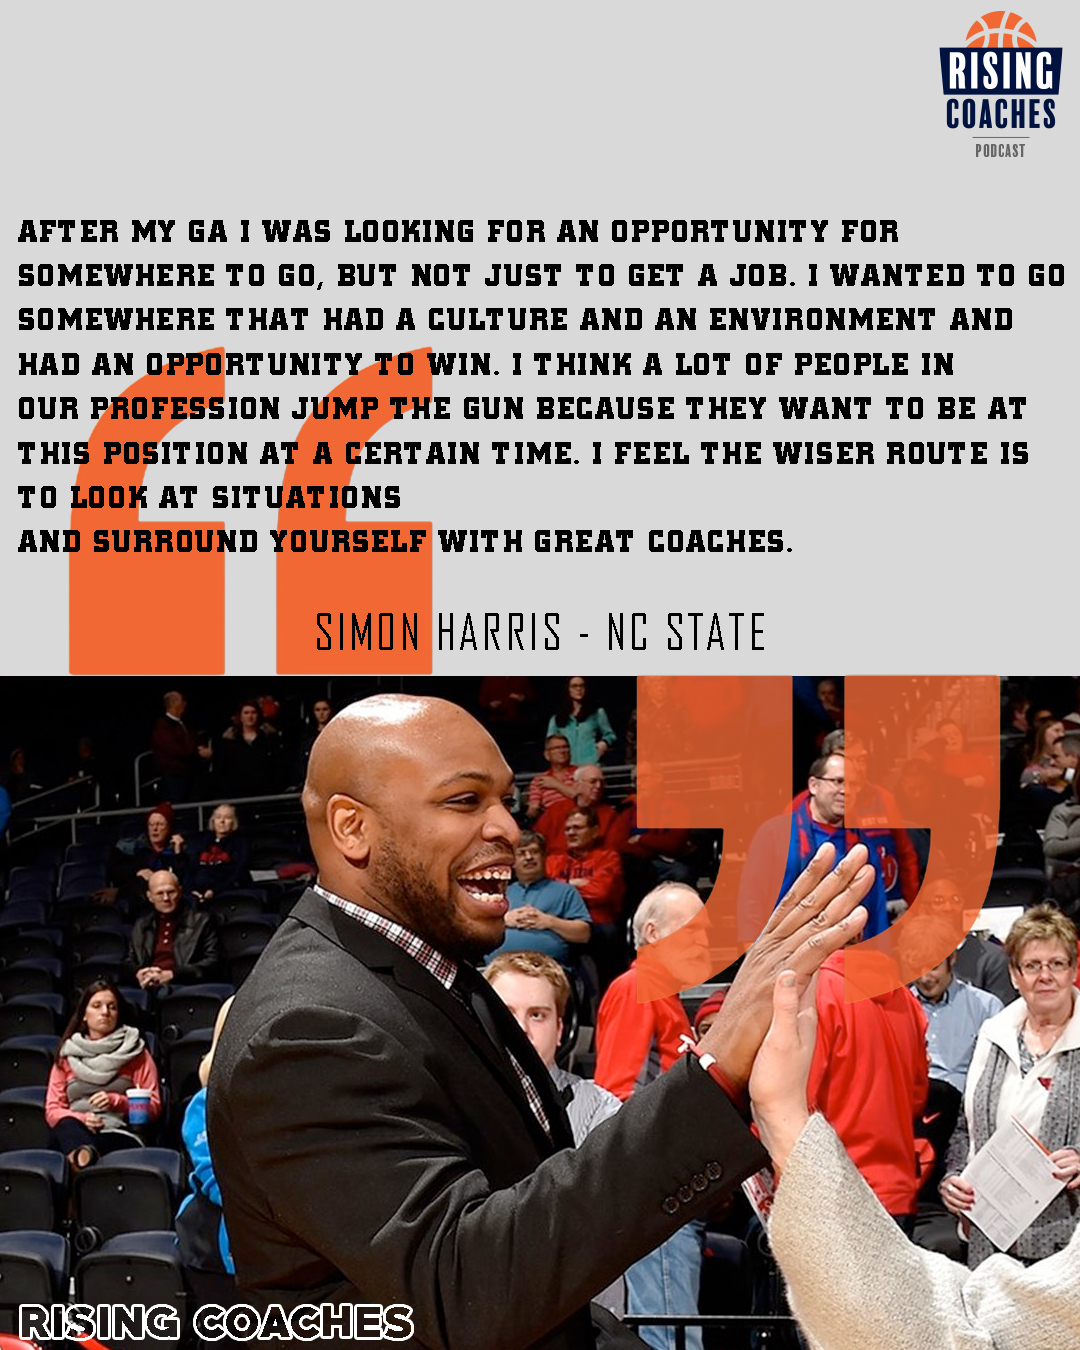 Quotes: Simon Harris - Surround Yourself with Great Coaches